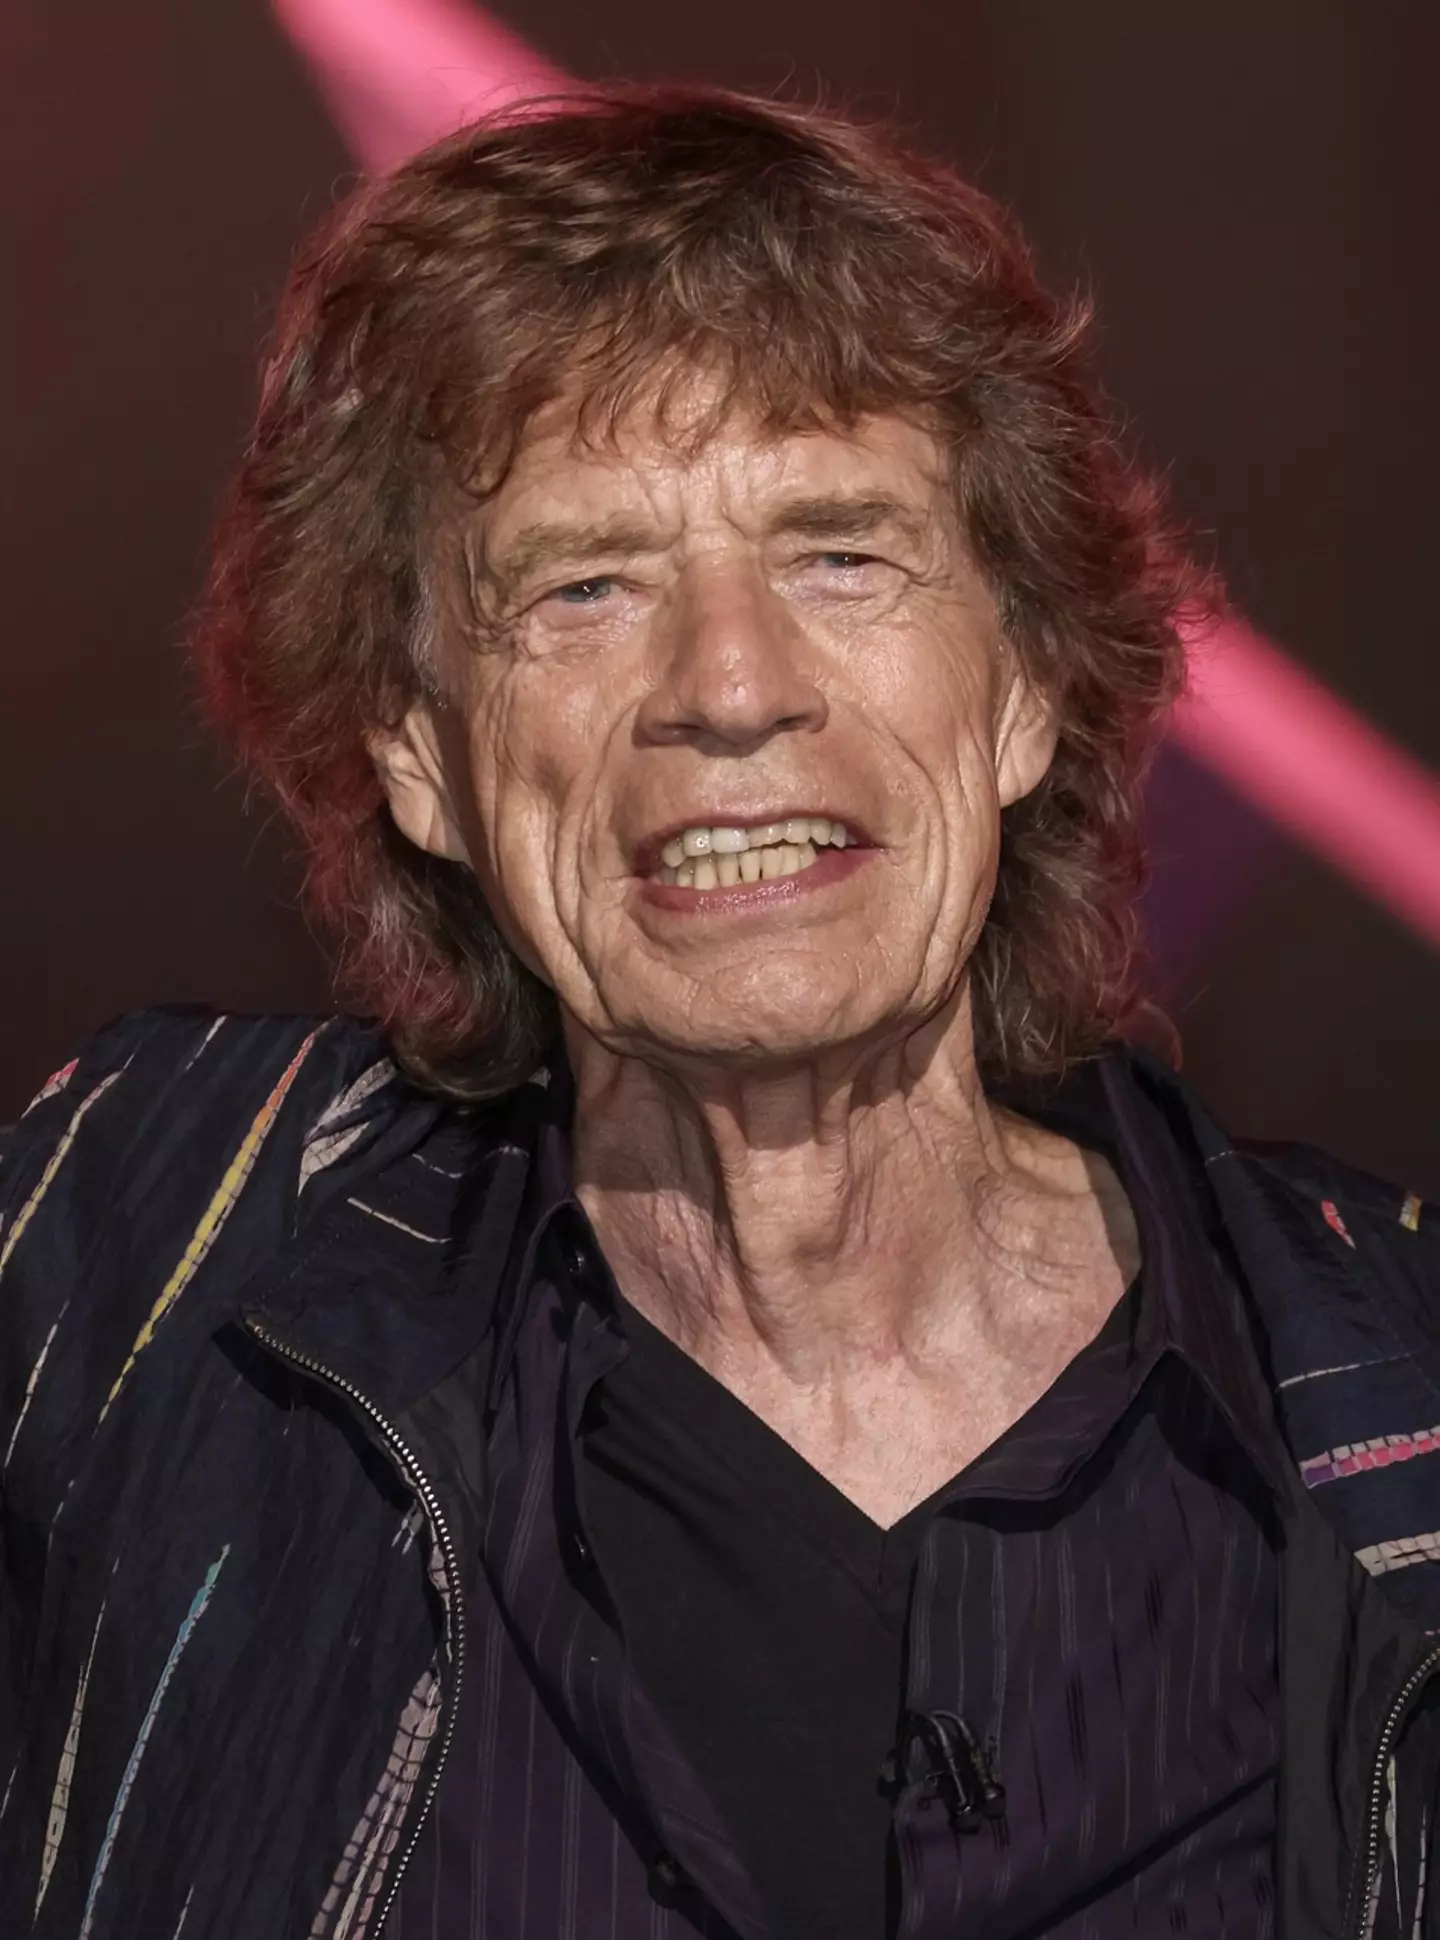 Mick Jagger has hinted that his eight children might not be inheriting his $500 million fortune.